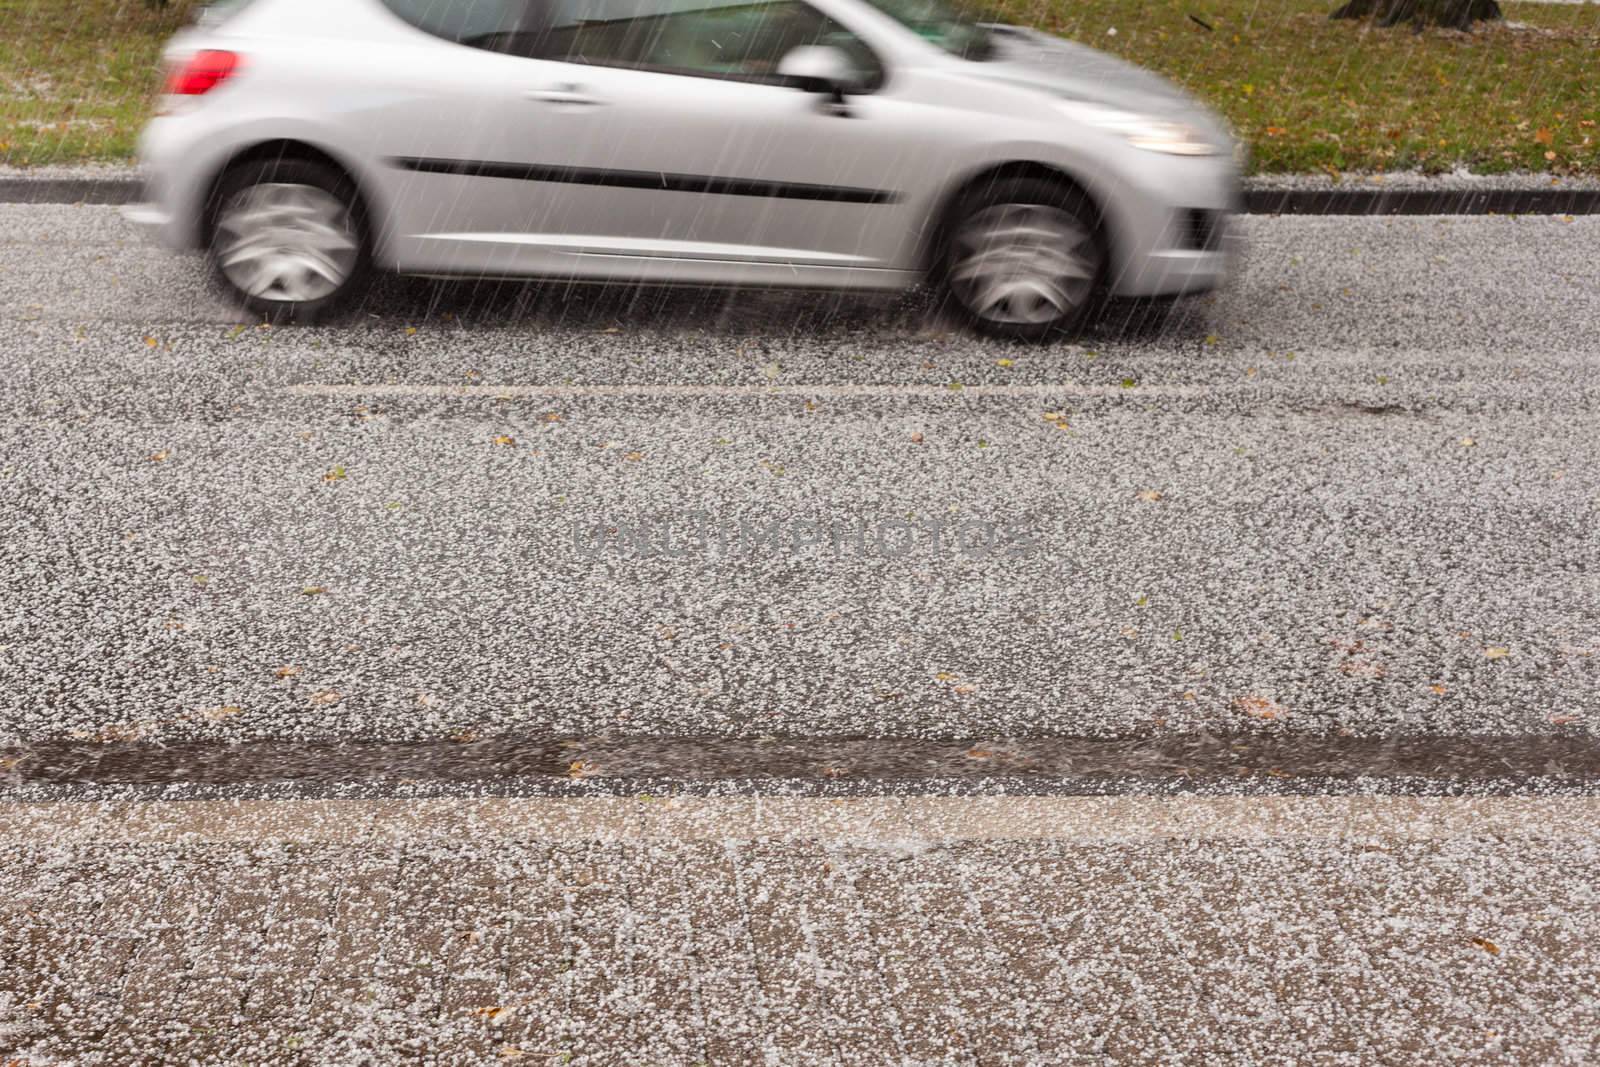 Small car driving on road through heavy hail storm.